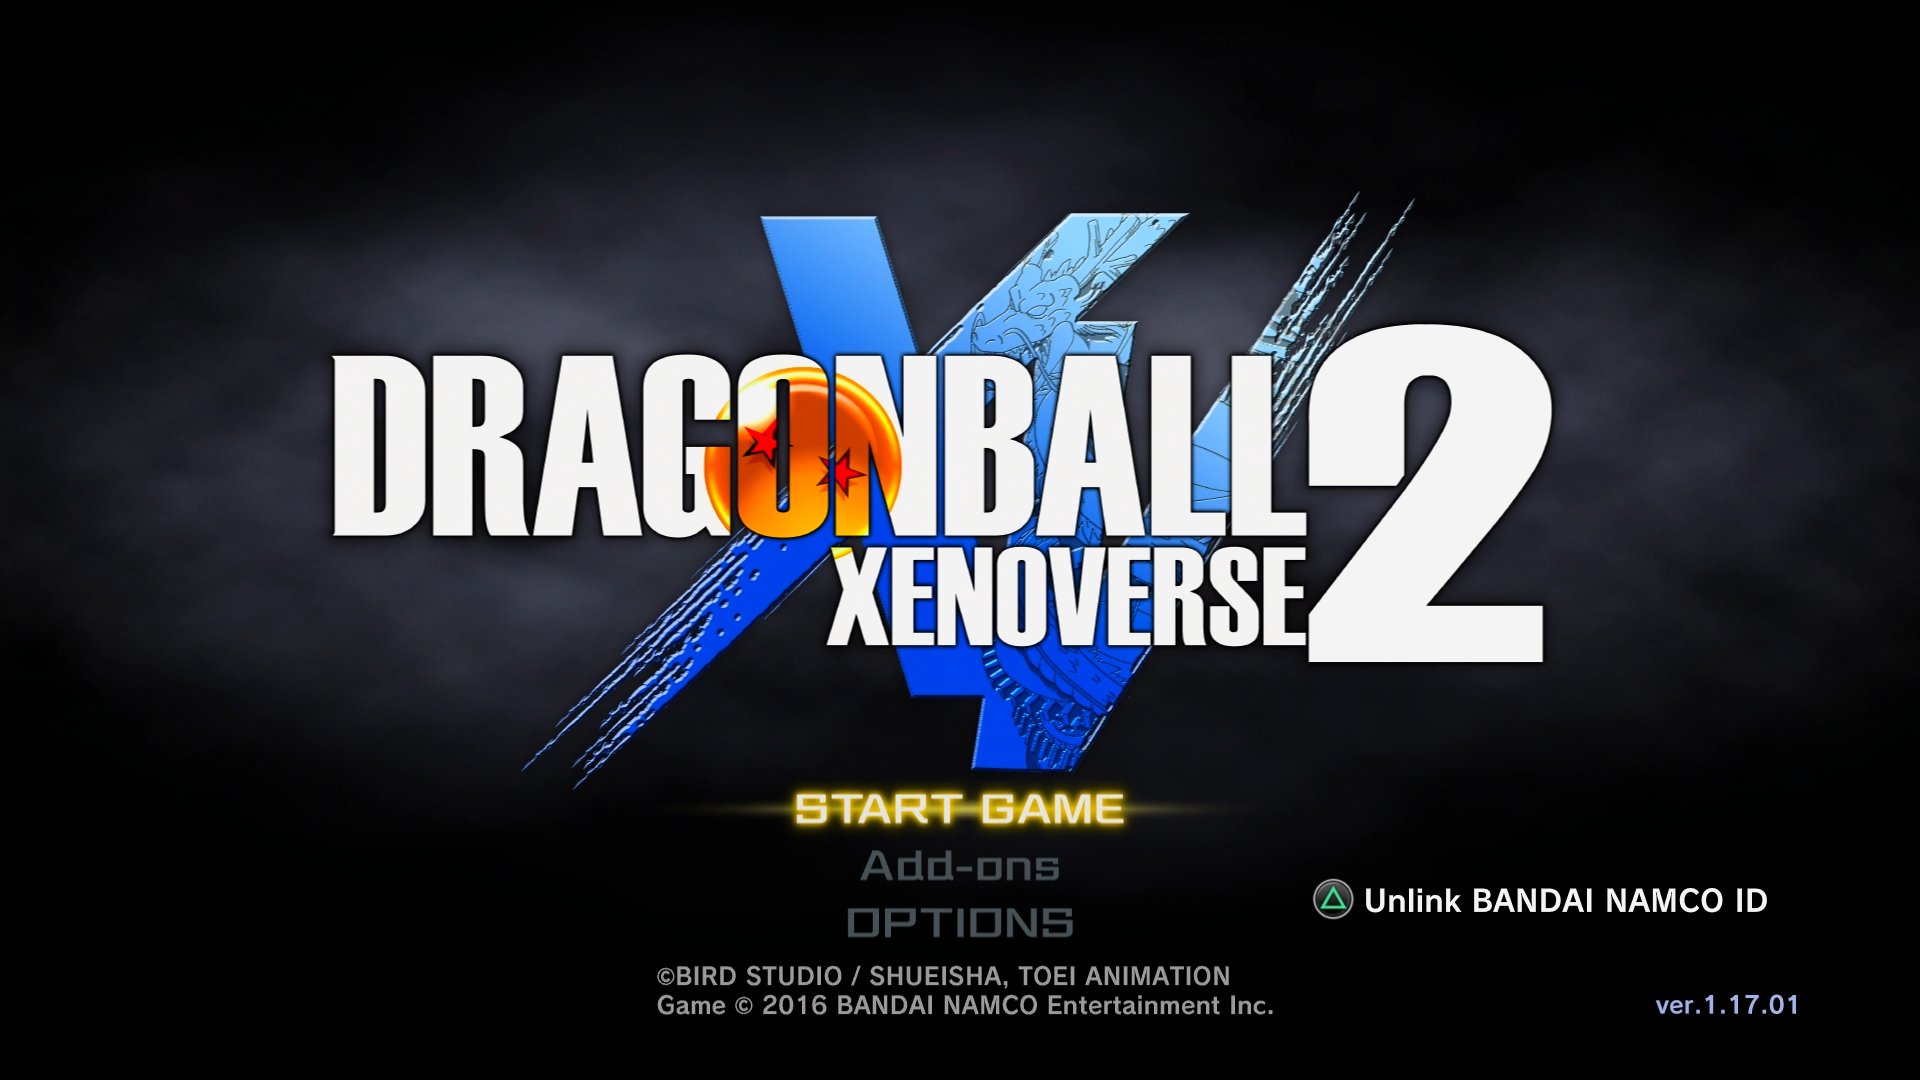 Burcol So It Turns Out There Wasn T An Update But You Can Now Link Your Bandai Namco Id To Your Dragon Ball Xenoverse 2 Account From The Title Menu This